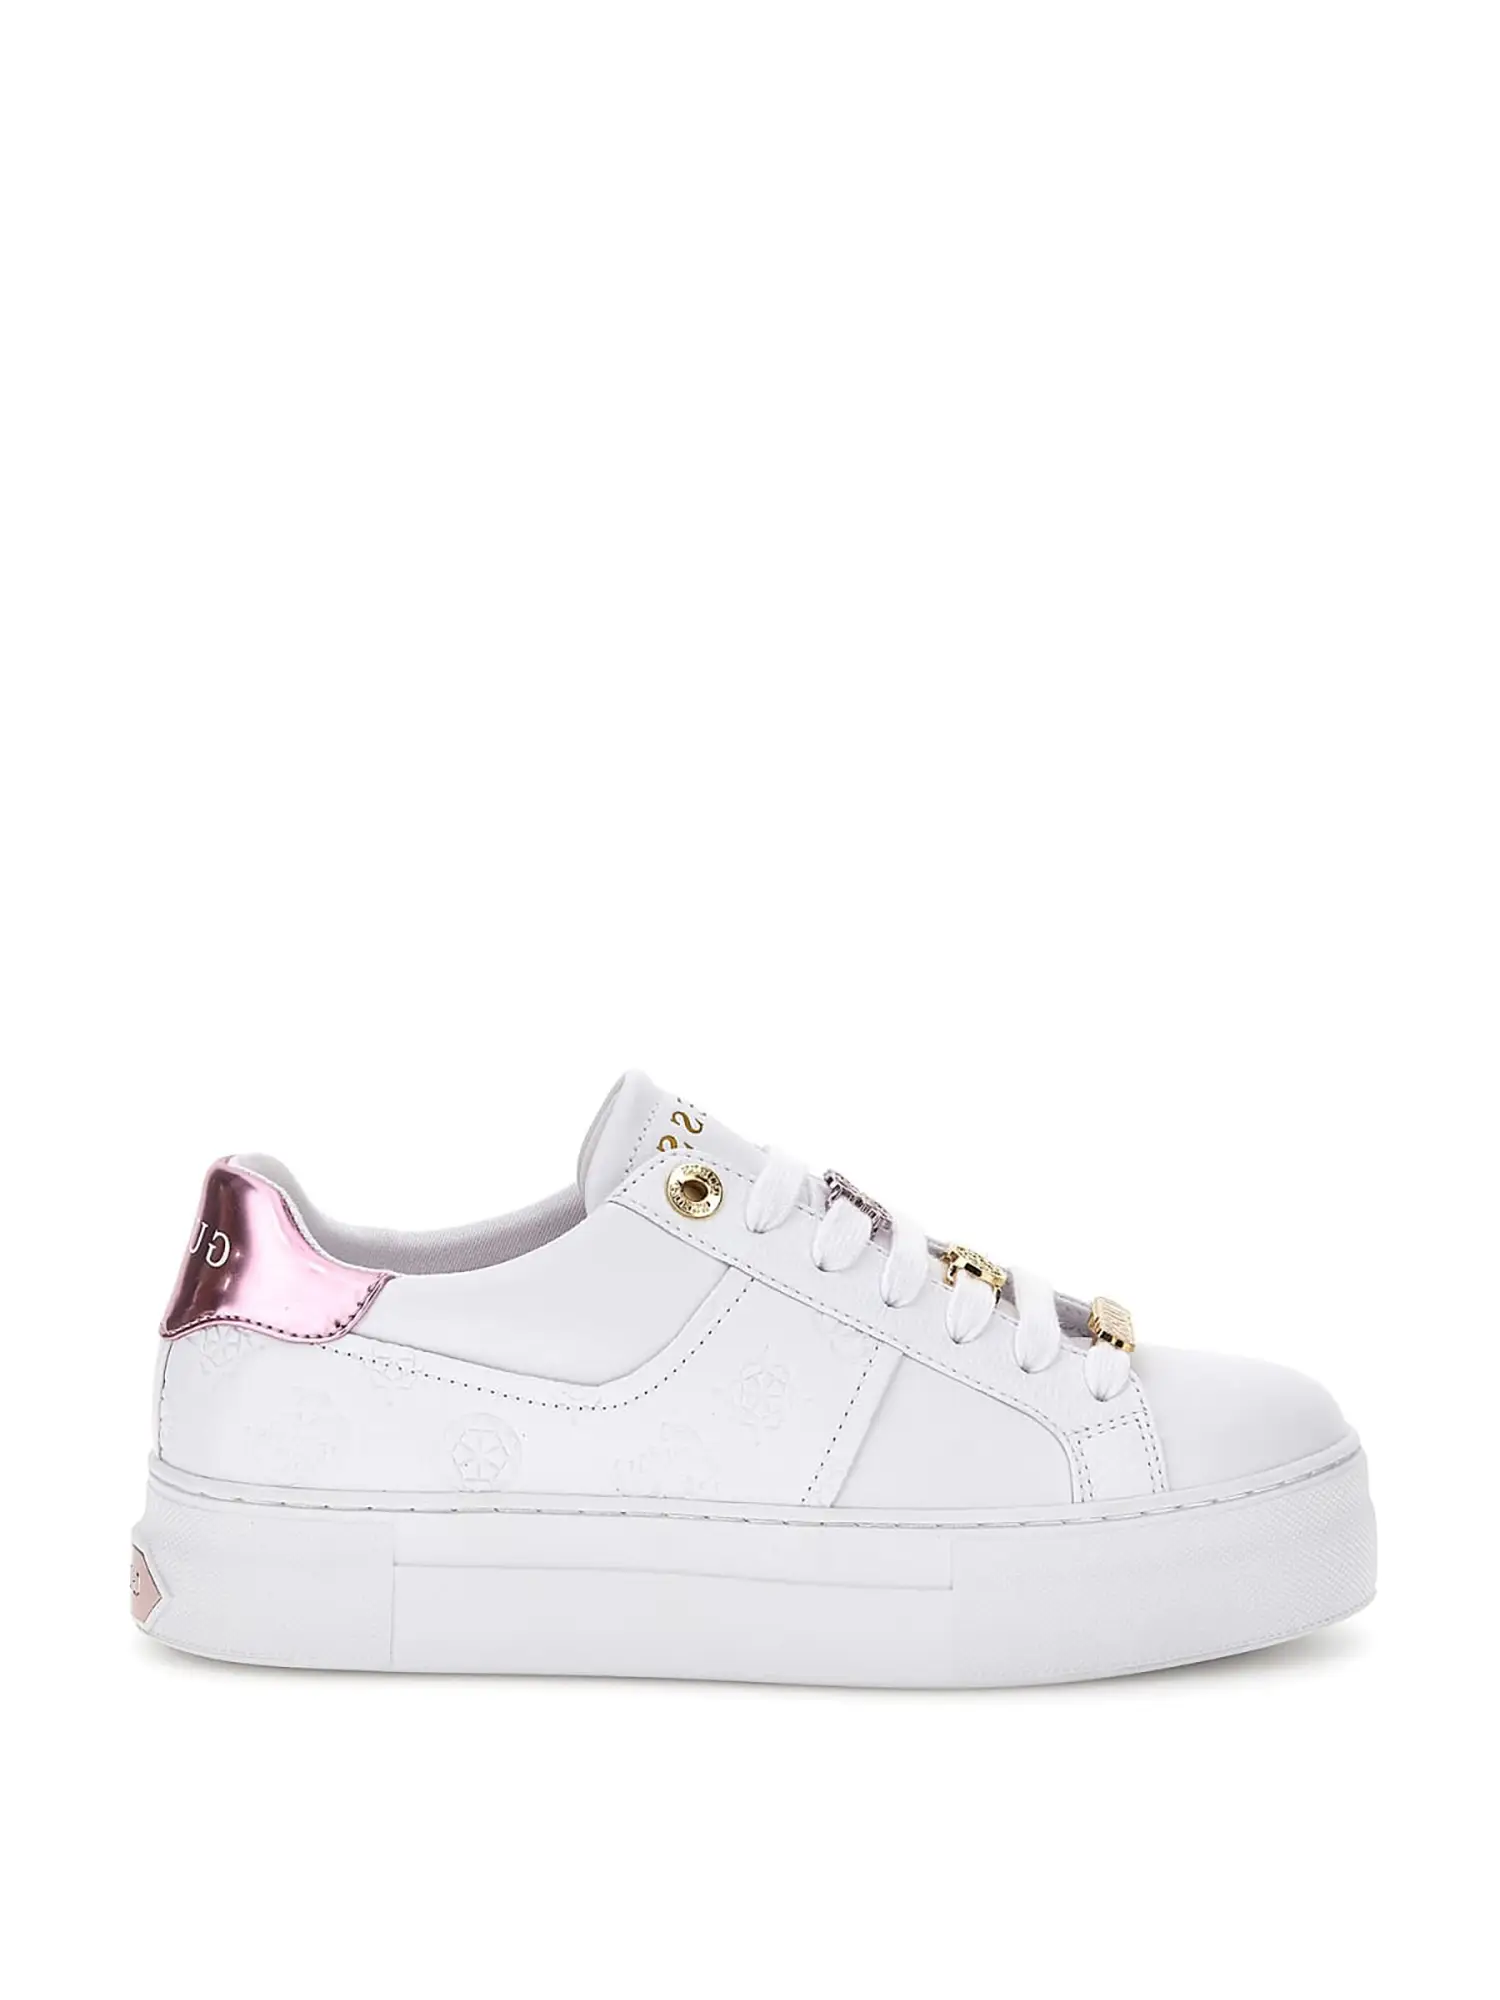 SNEAKERS DONNA - GUESS - FLJGIE FAL12 - BIANCO/ROSA, 39